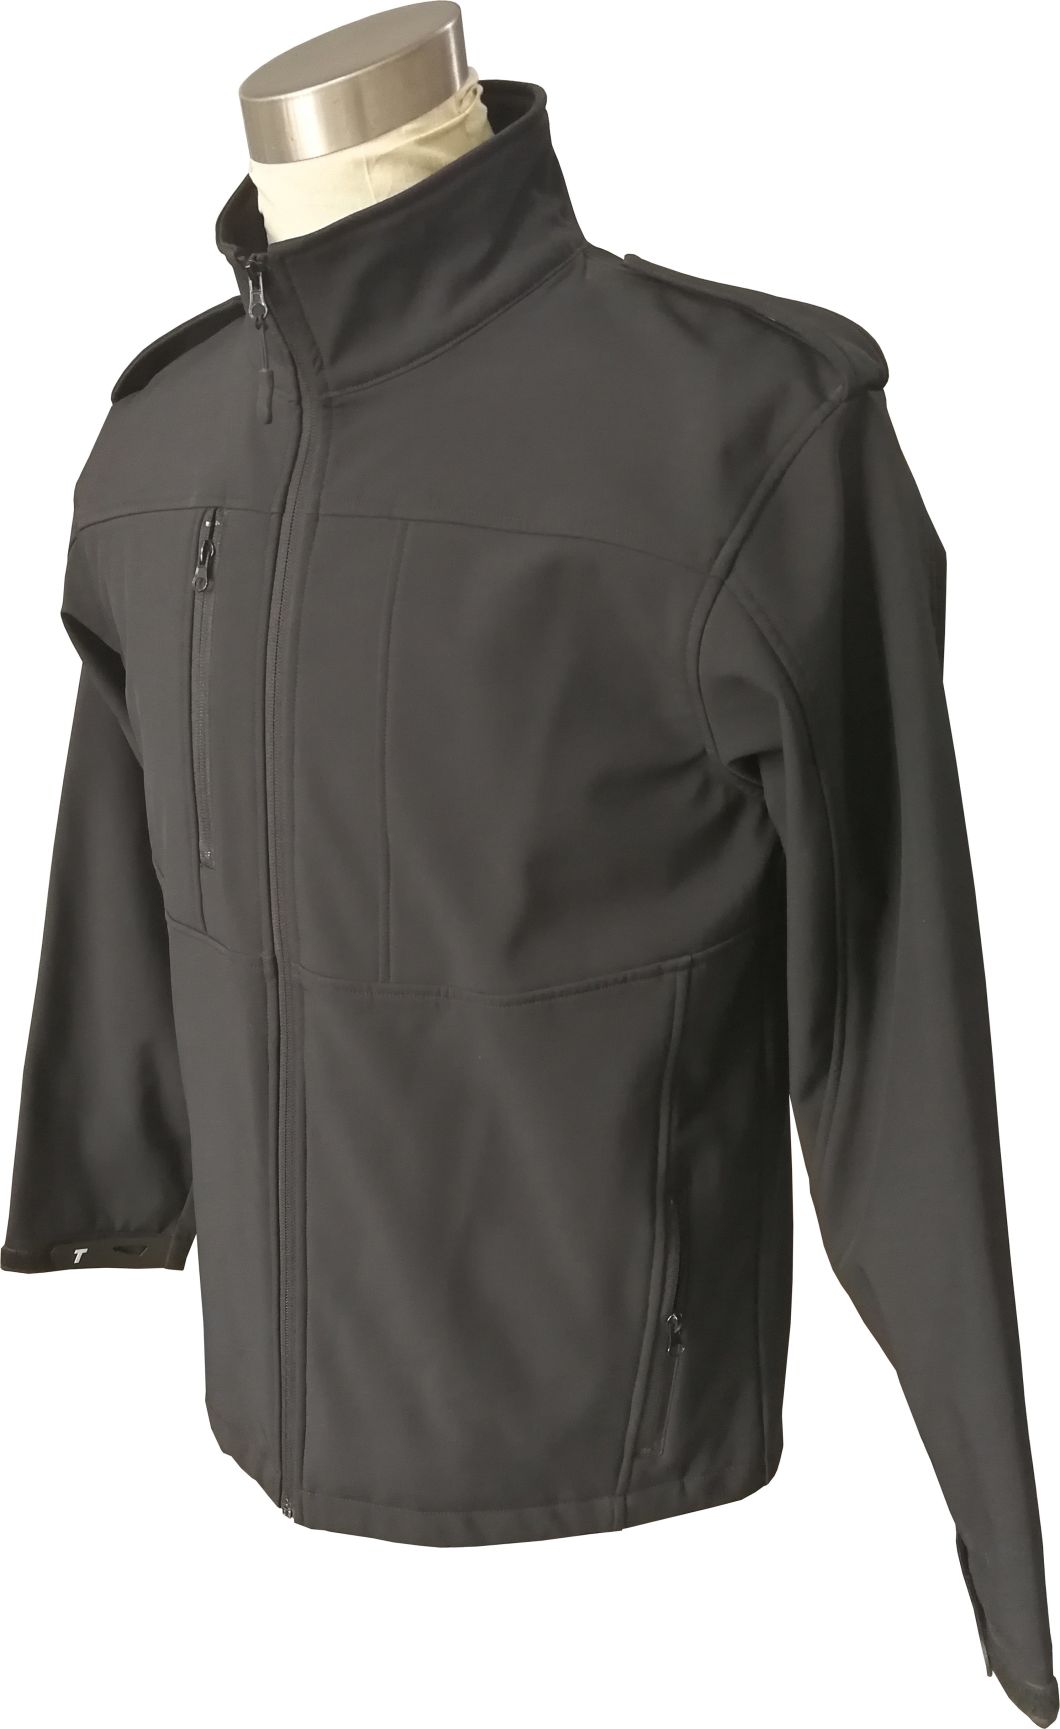 Men's Fost Shell Jacket Outerwear Water Resisitant and Windproof